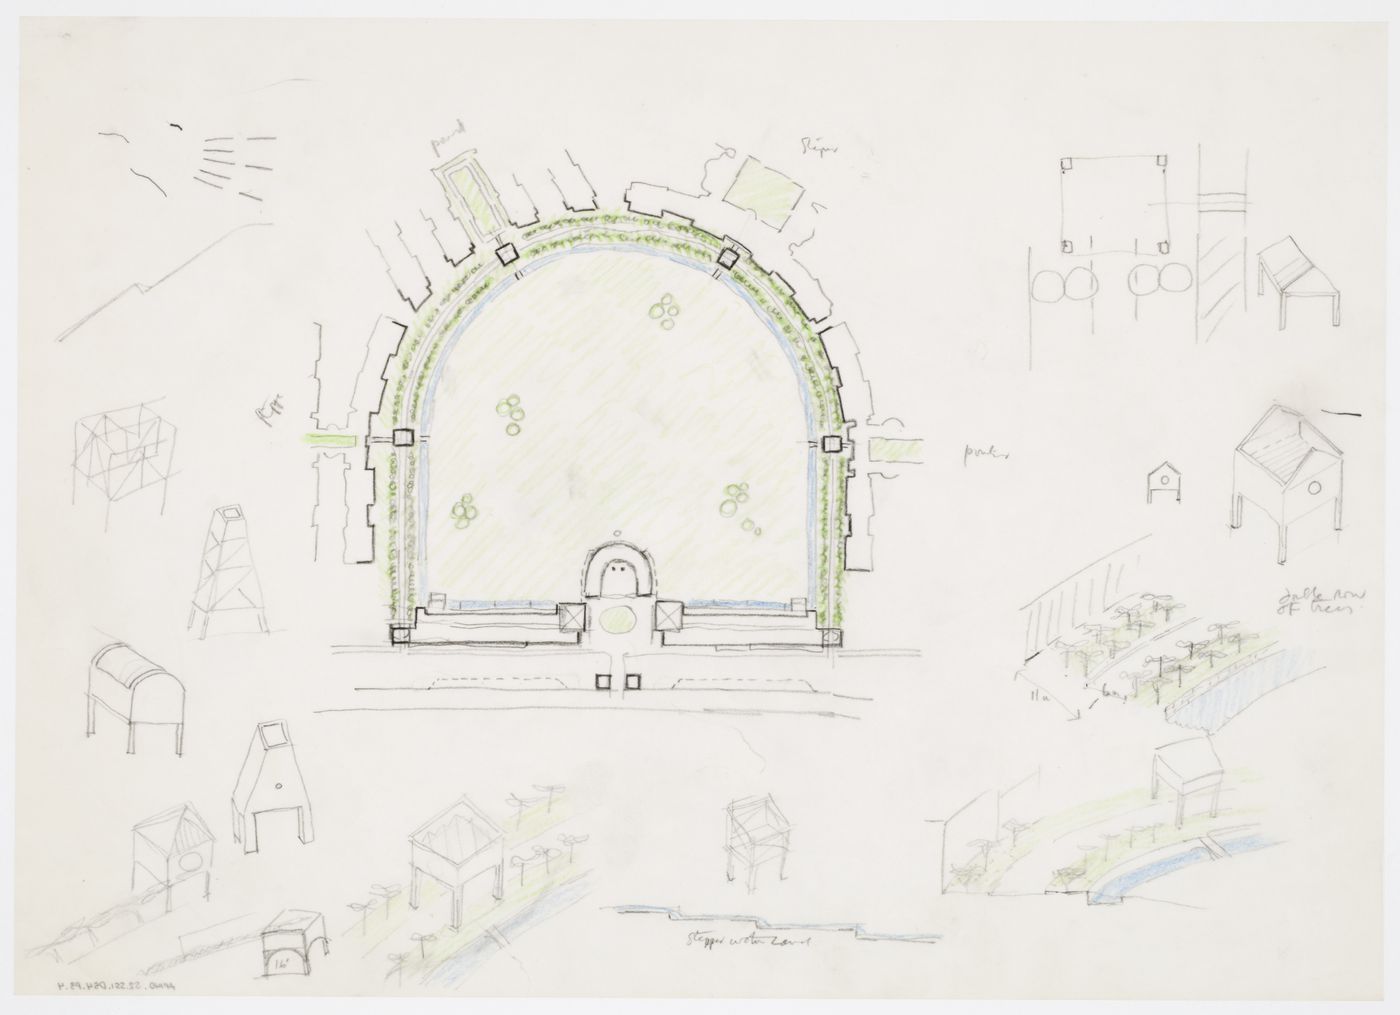 Bayer AG Headquarters, Monheim, Germany: site plan and sketches